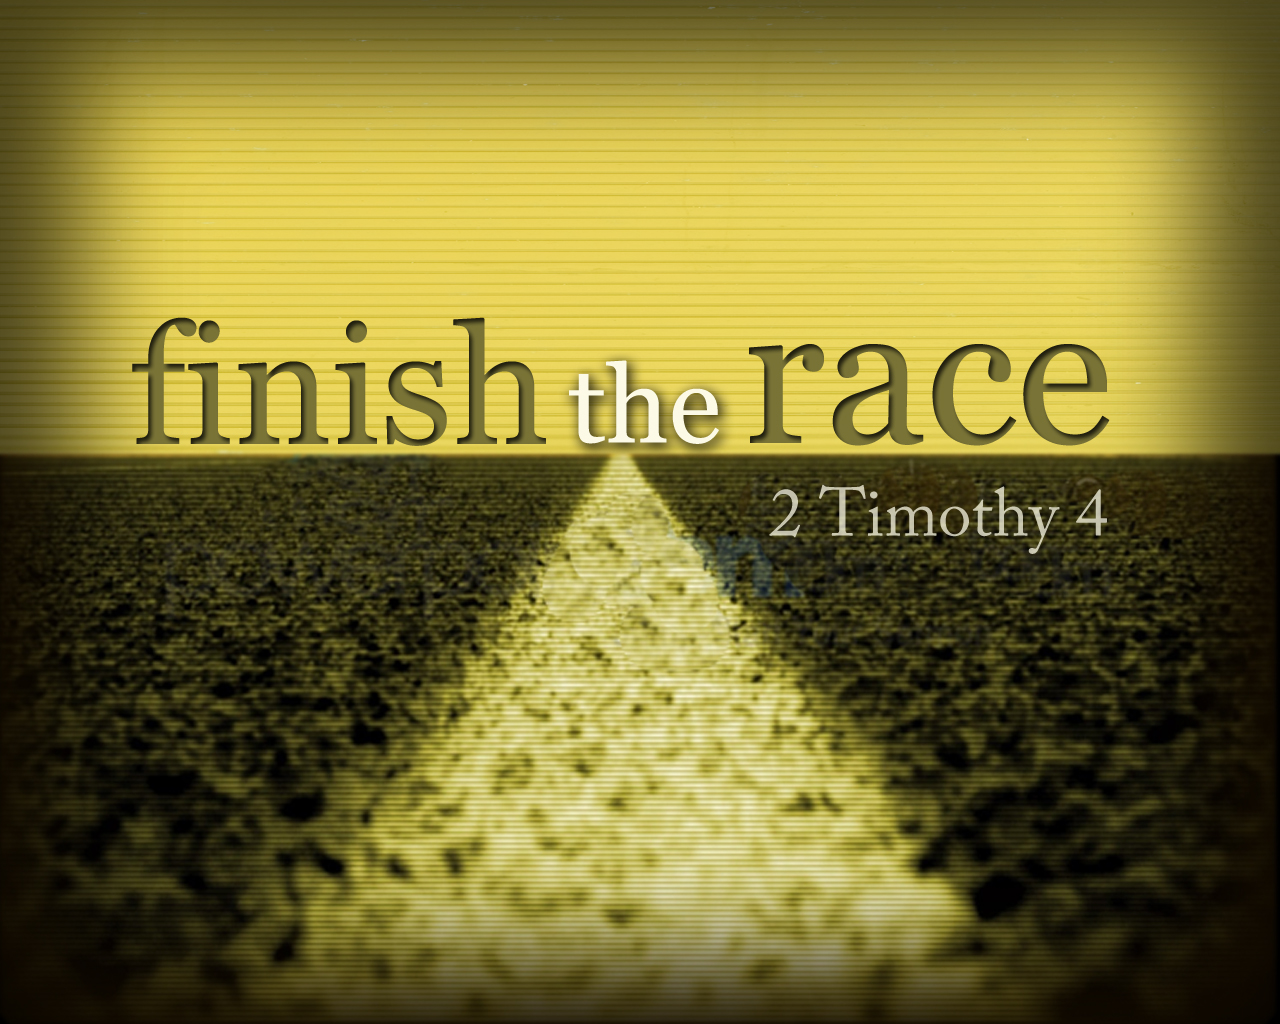 Today, Finish the Race